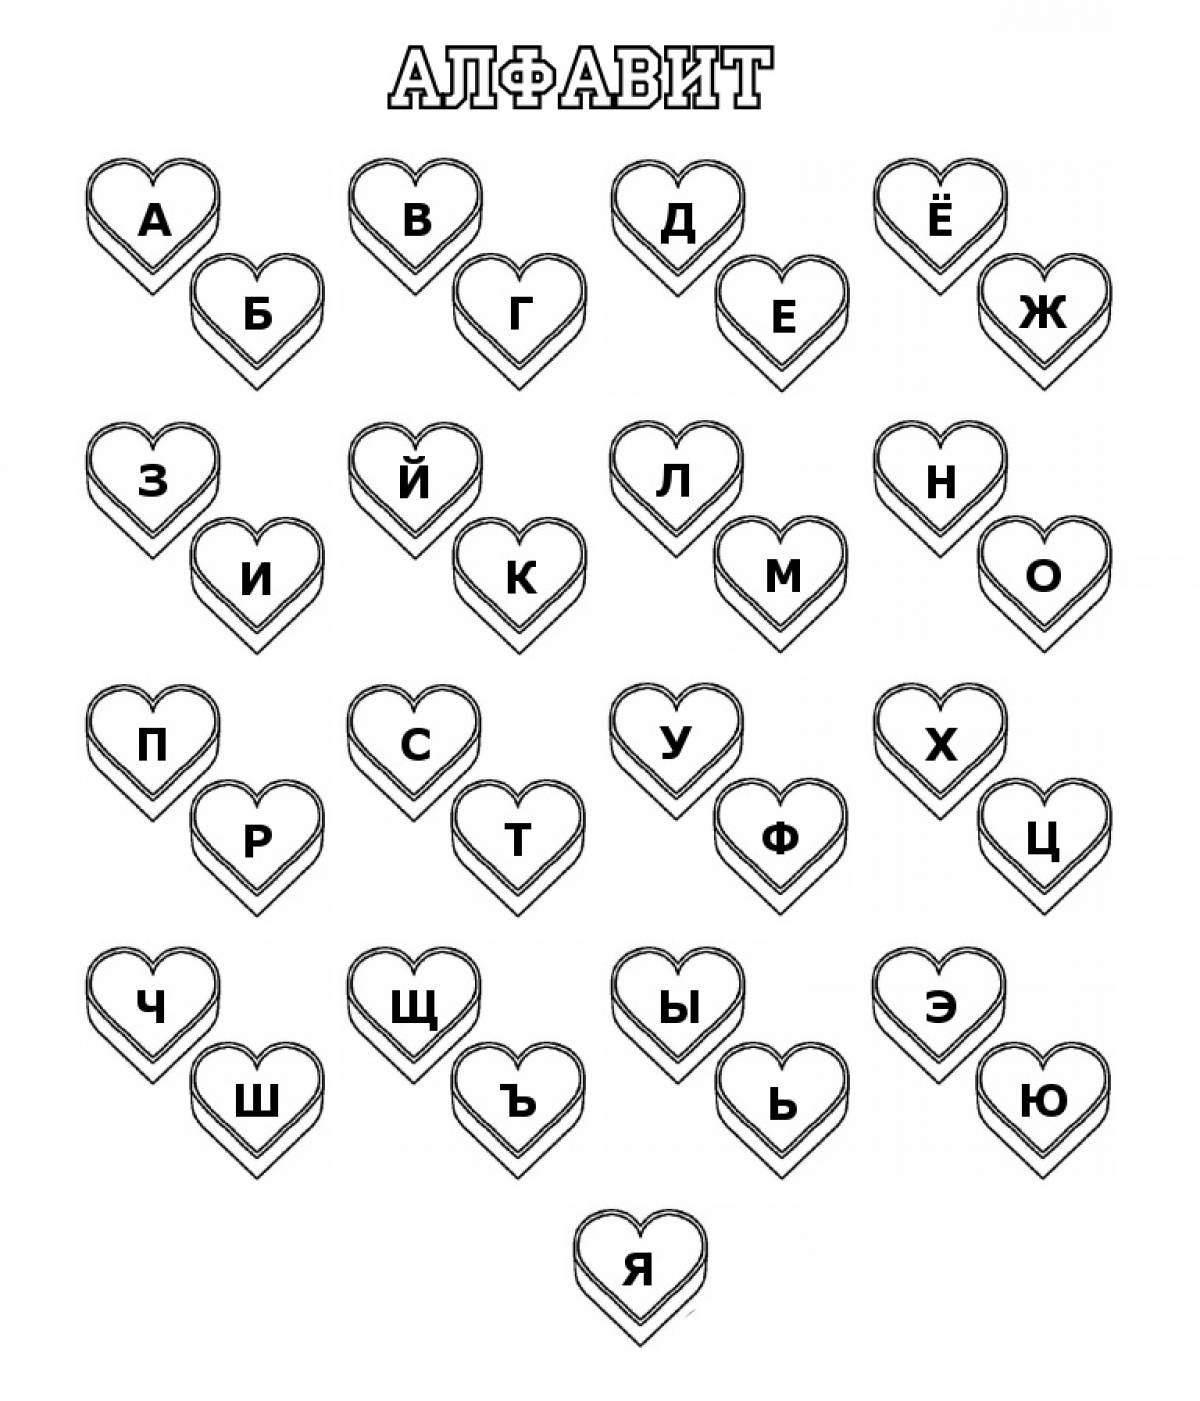 Letters in hearts